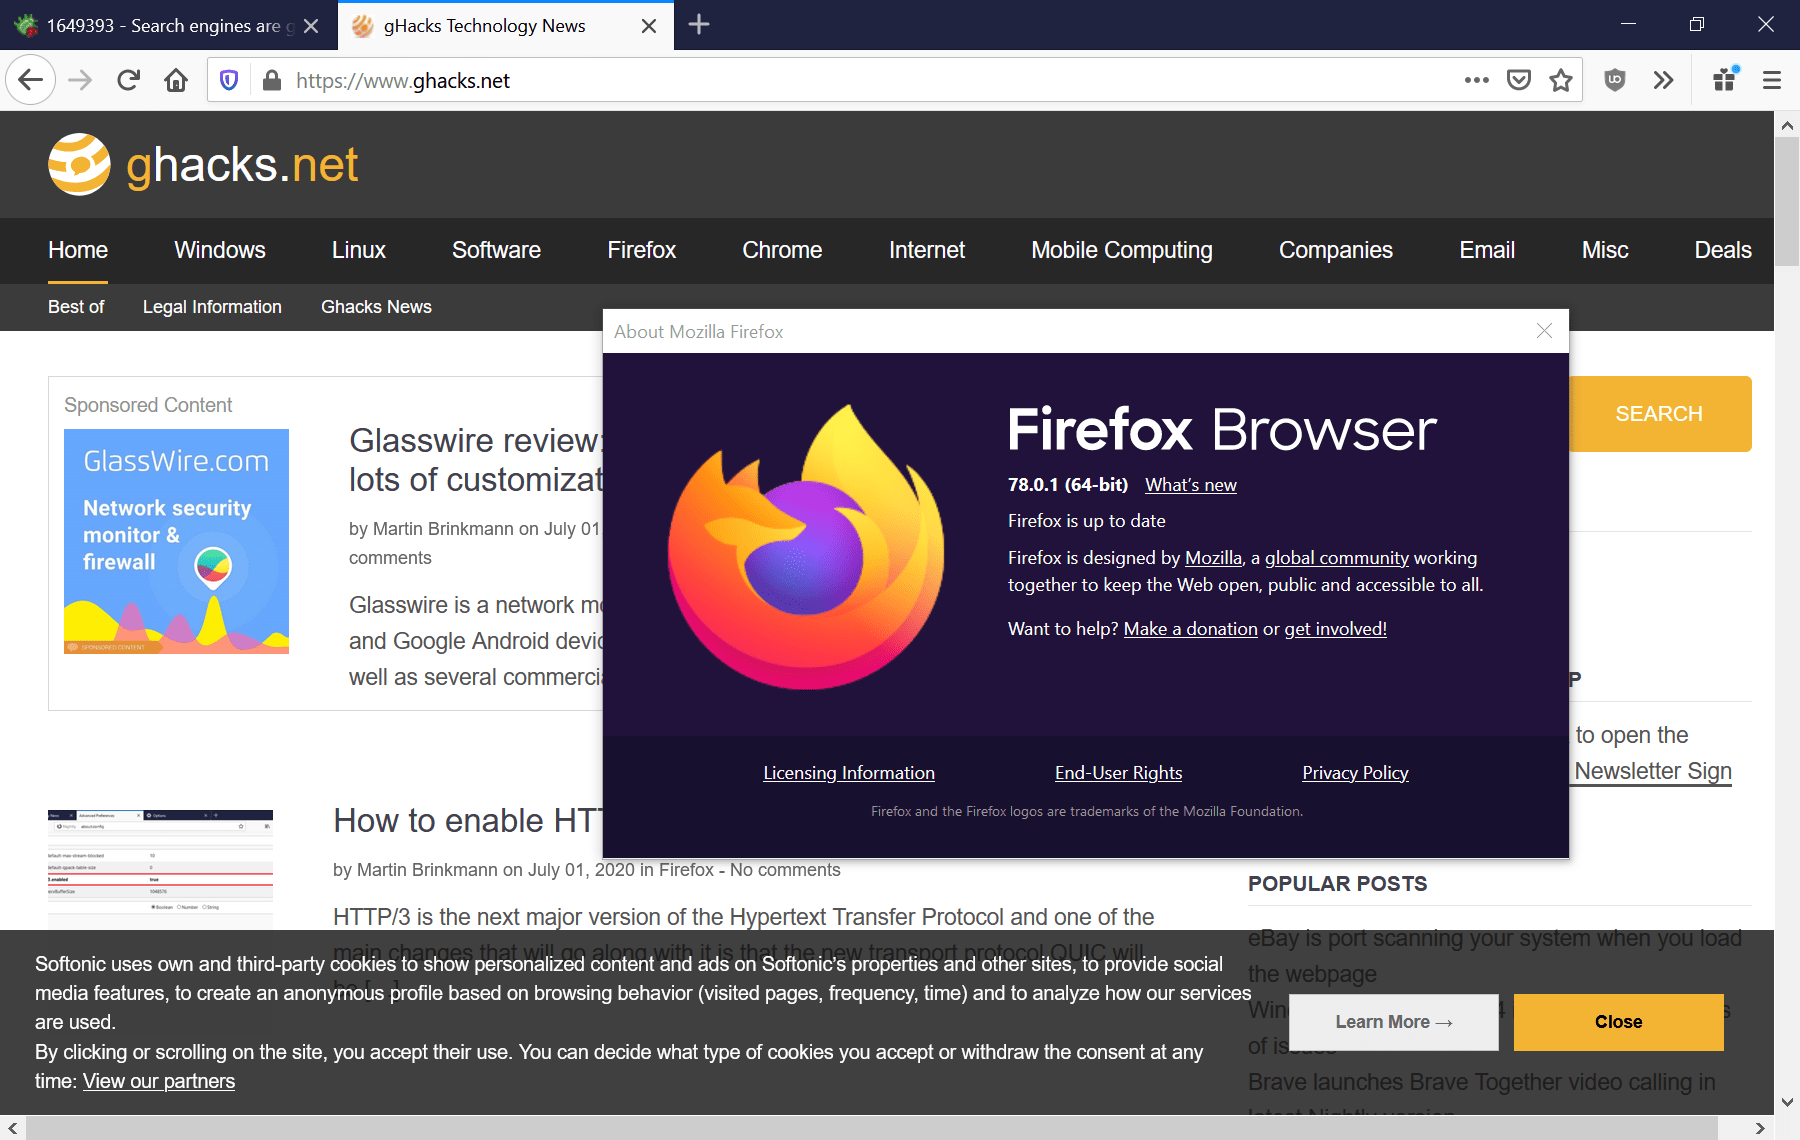 Mozilla pauses Firefox 78.0 rollout, prepares Firefox 78.0.1